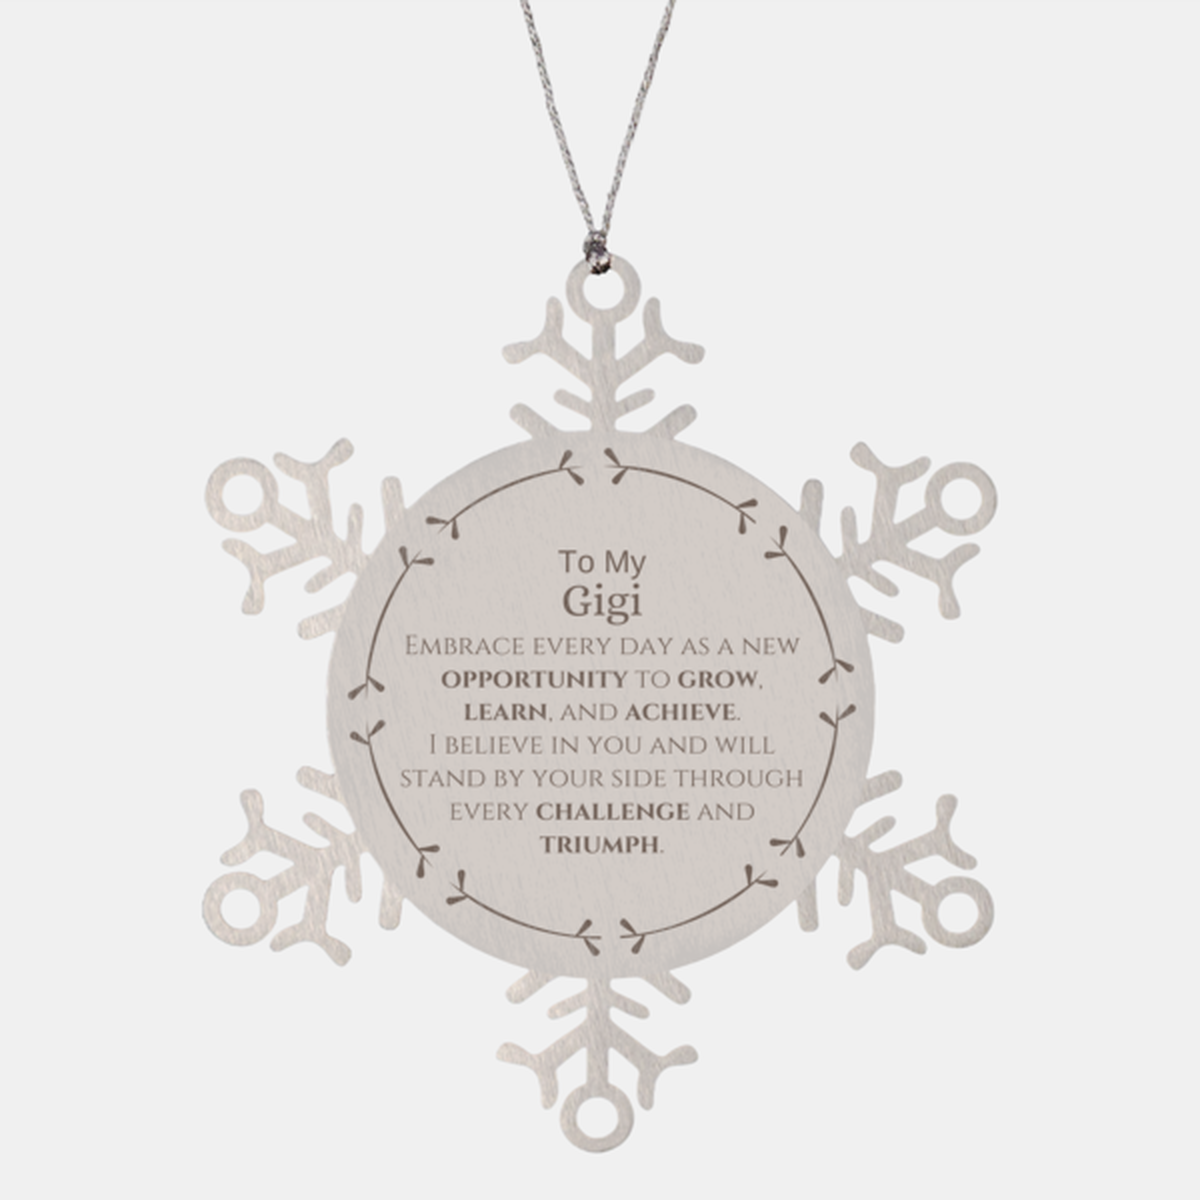 To My Gigi Gifts, I believe in you and will stand by your side, Inspirational Snowflake Ornament For Gigi, Birthday Christmas Motivational Gigi Gifts